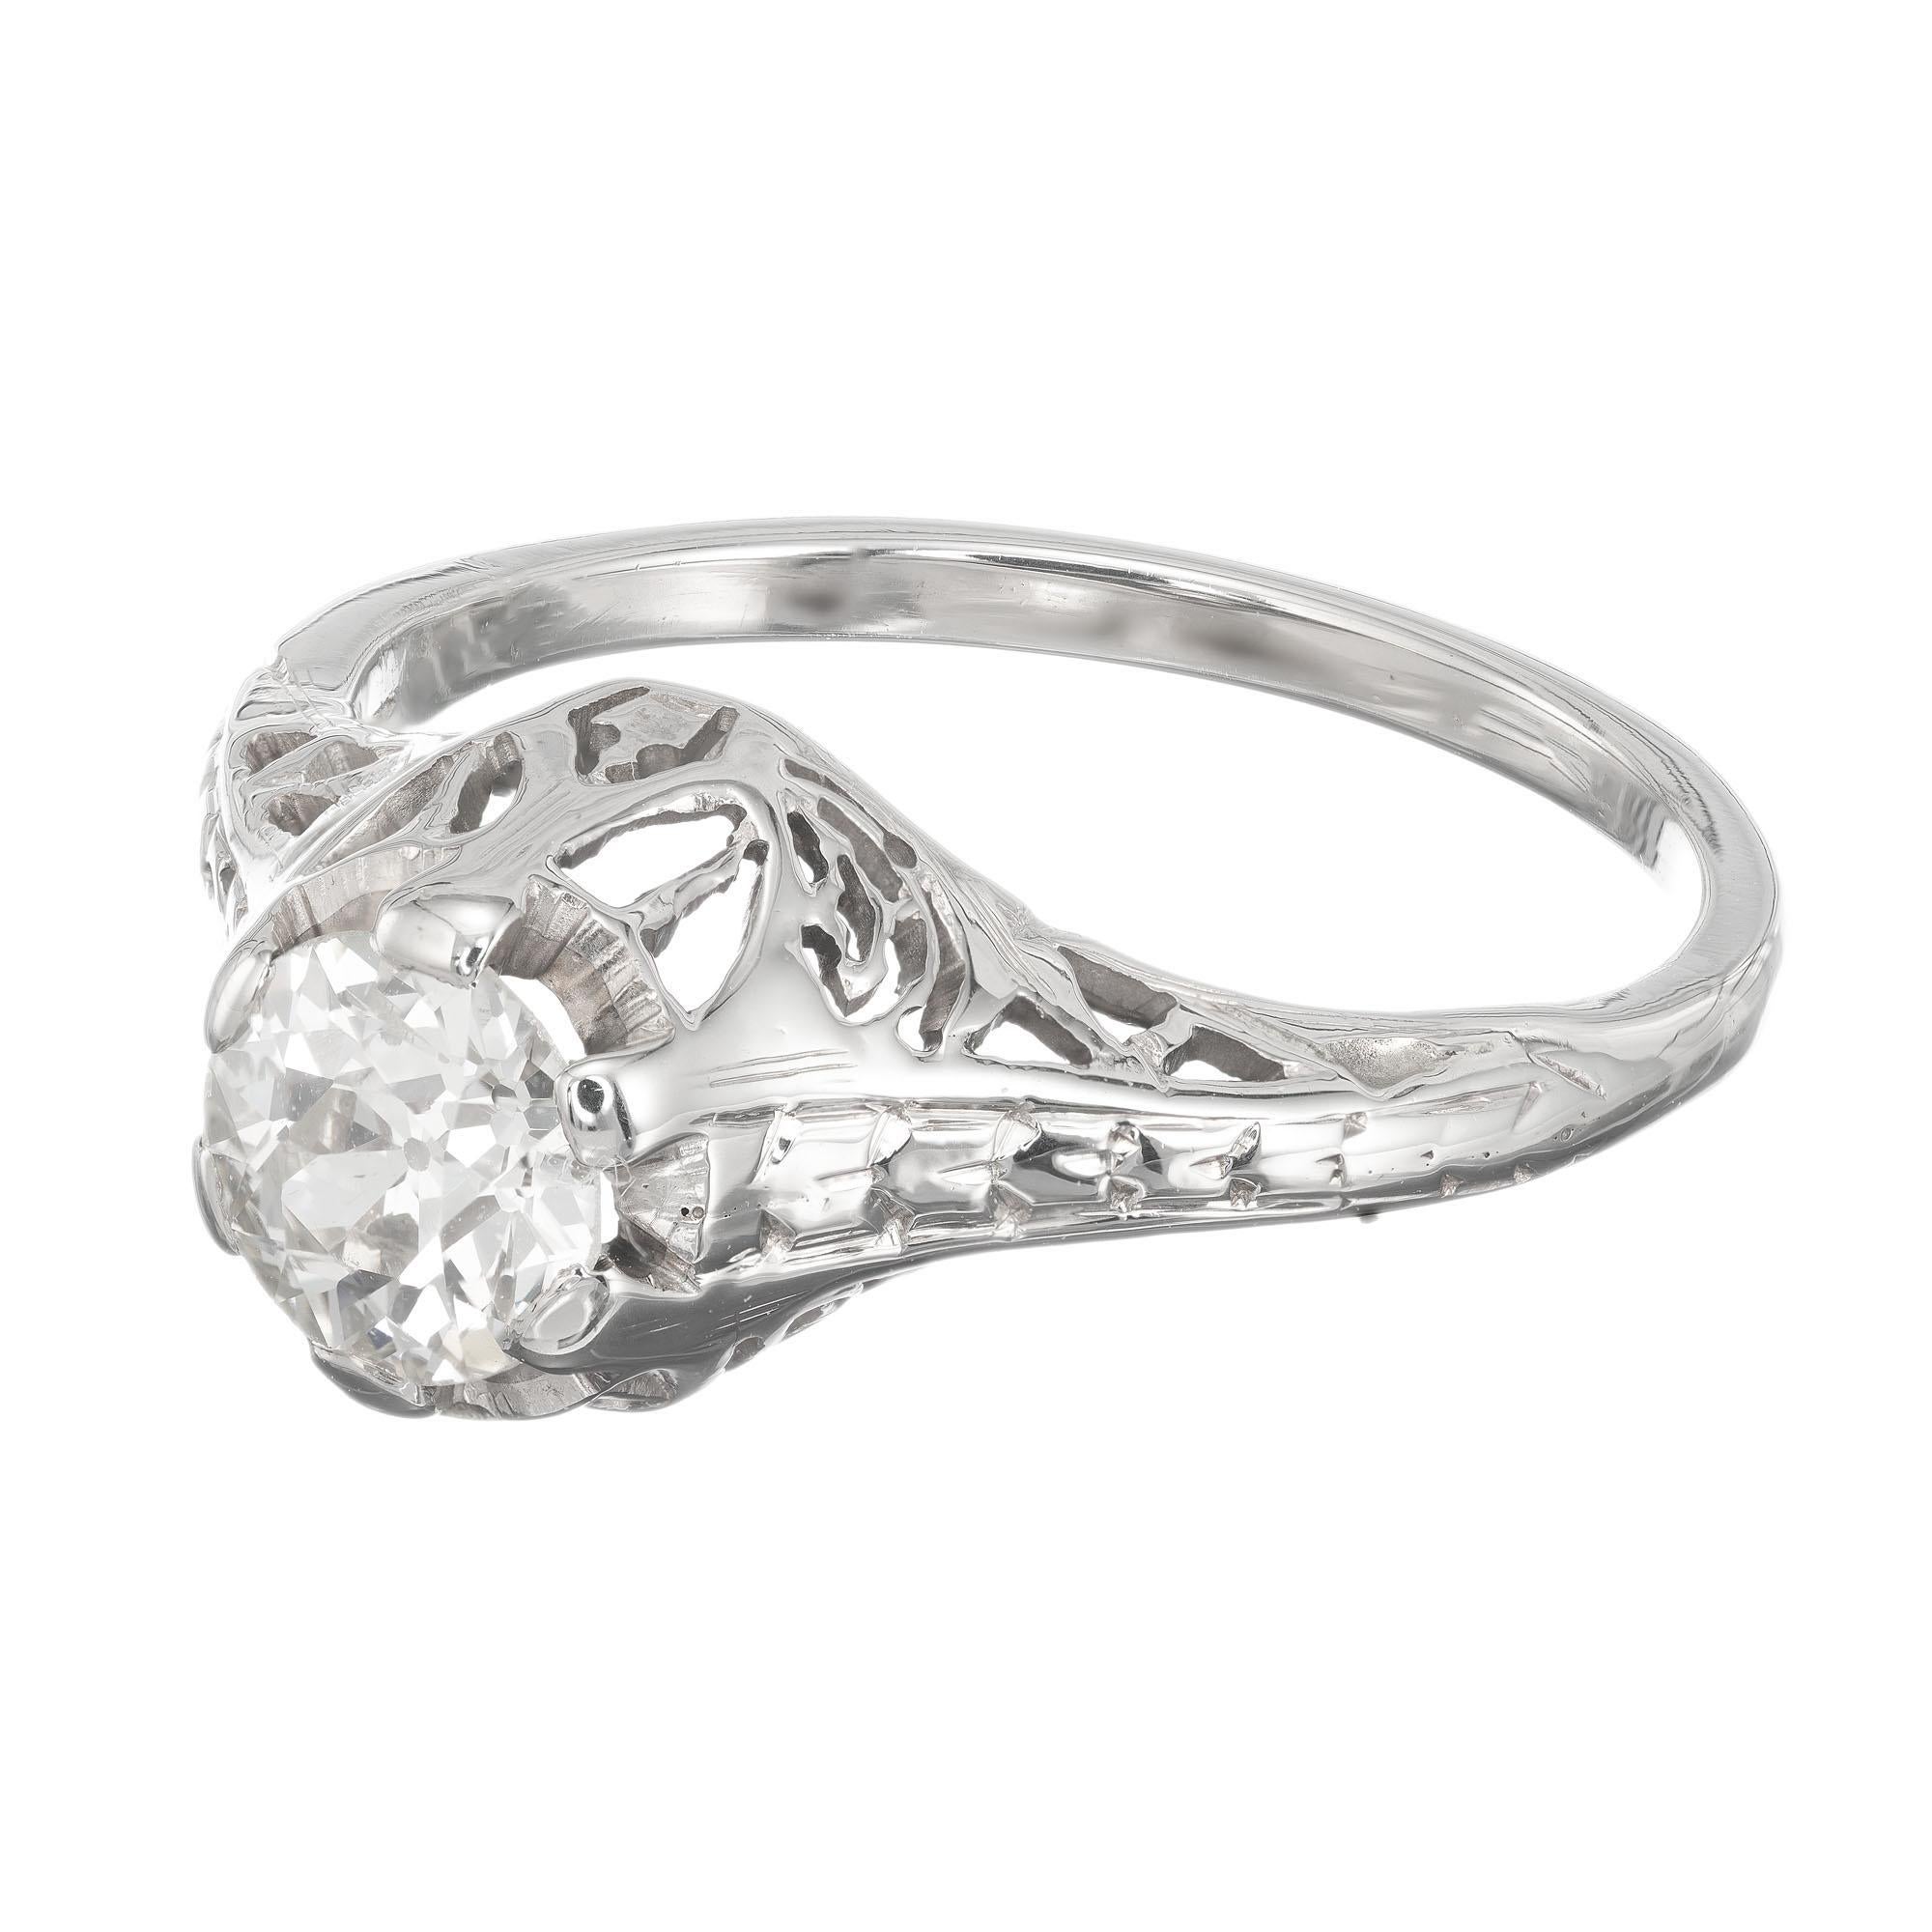 1940's diamond engagement ring.  Old European cut center diamond in a filigree late Art Deco 14k white gold setting. EGL certified. 

1 diamond old European cut, approx. total weight .51cts, I, VS2, 5.34 x 5.32 x 3.10mm. EGL certificate # US